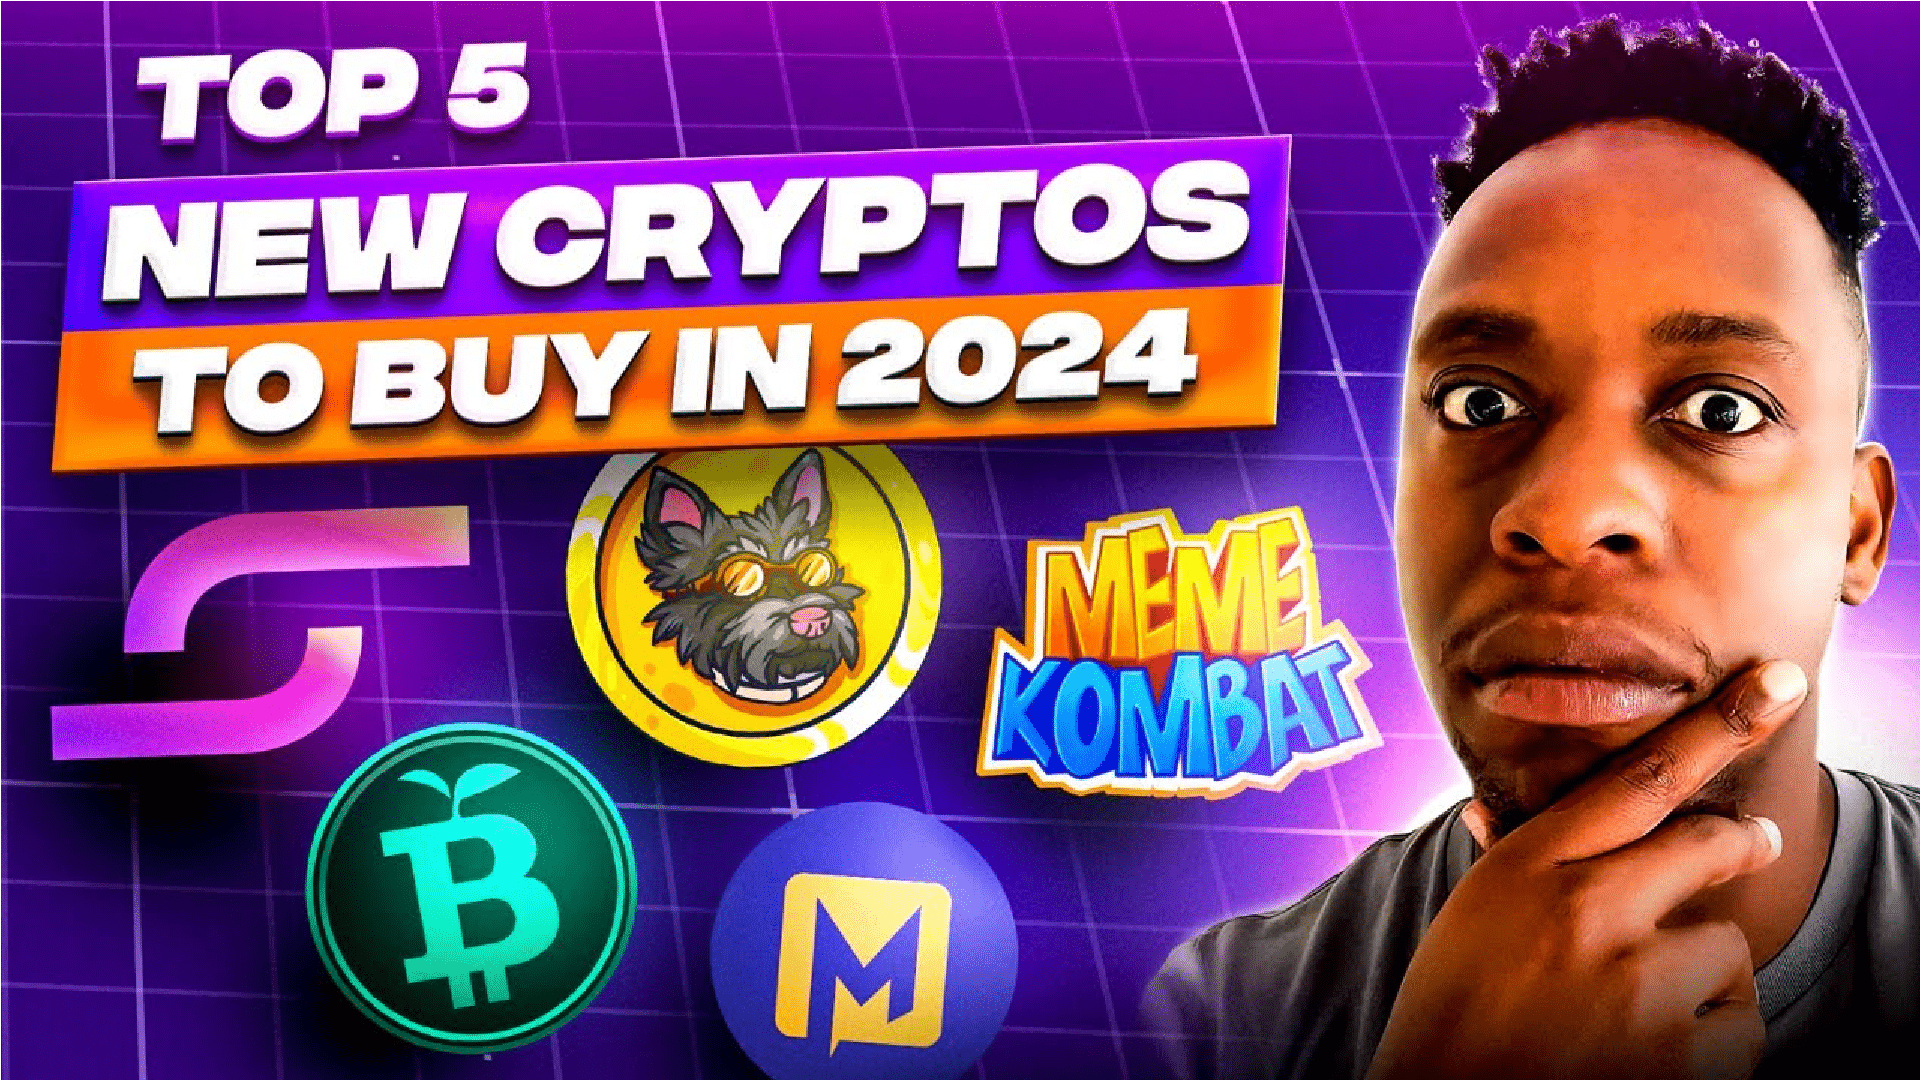 Top 5 Newly Emerging Cryptocurrencies Worth Considering for Long-Term Investment in 2024